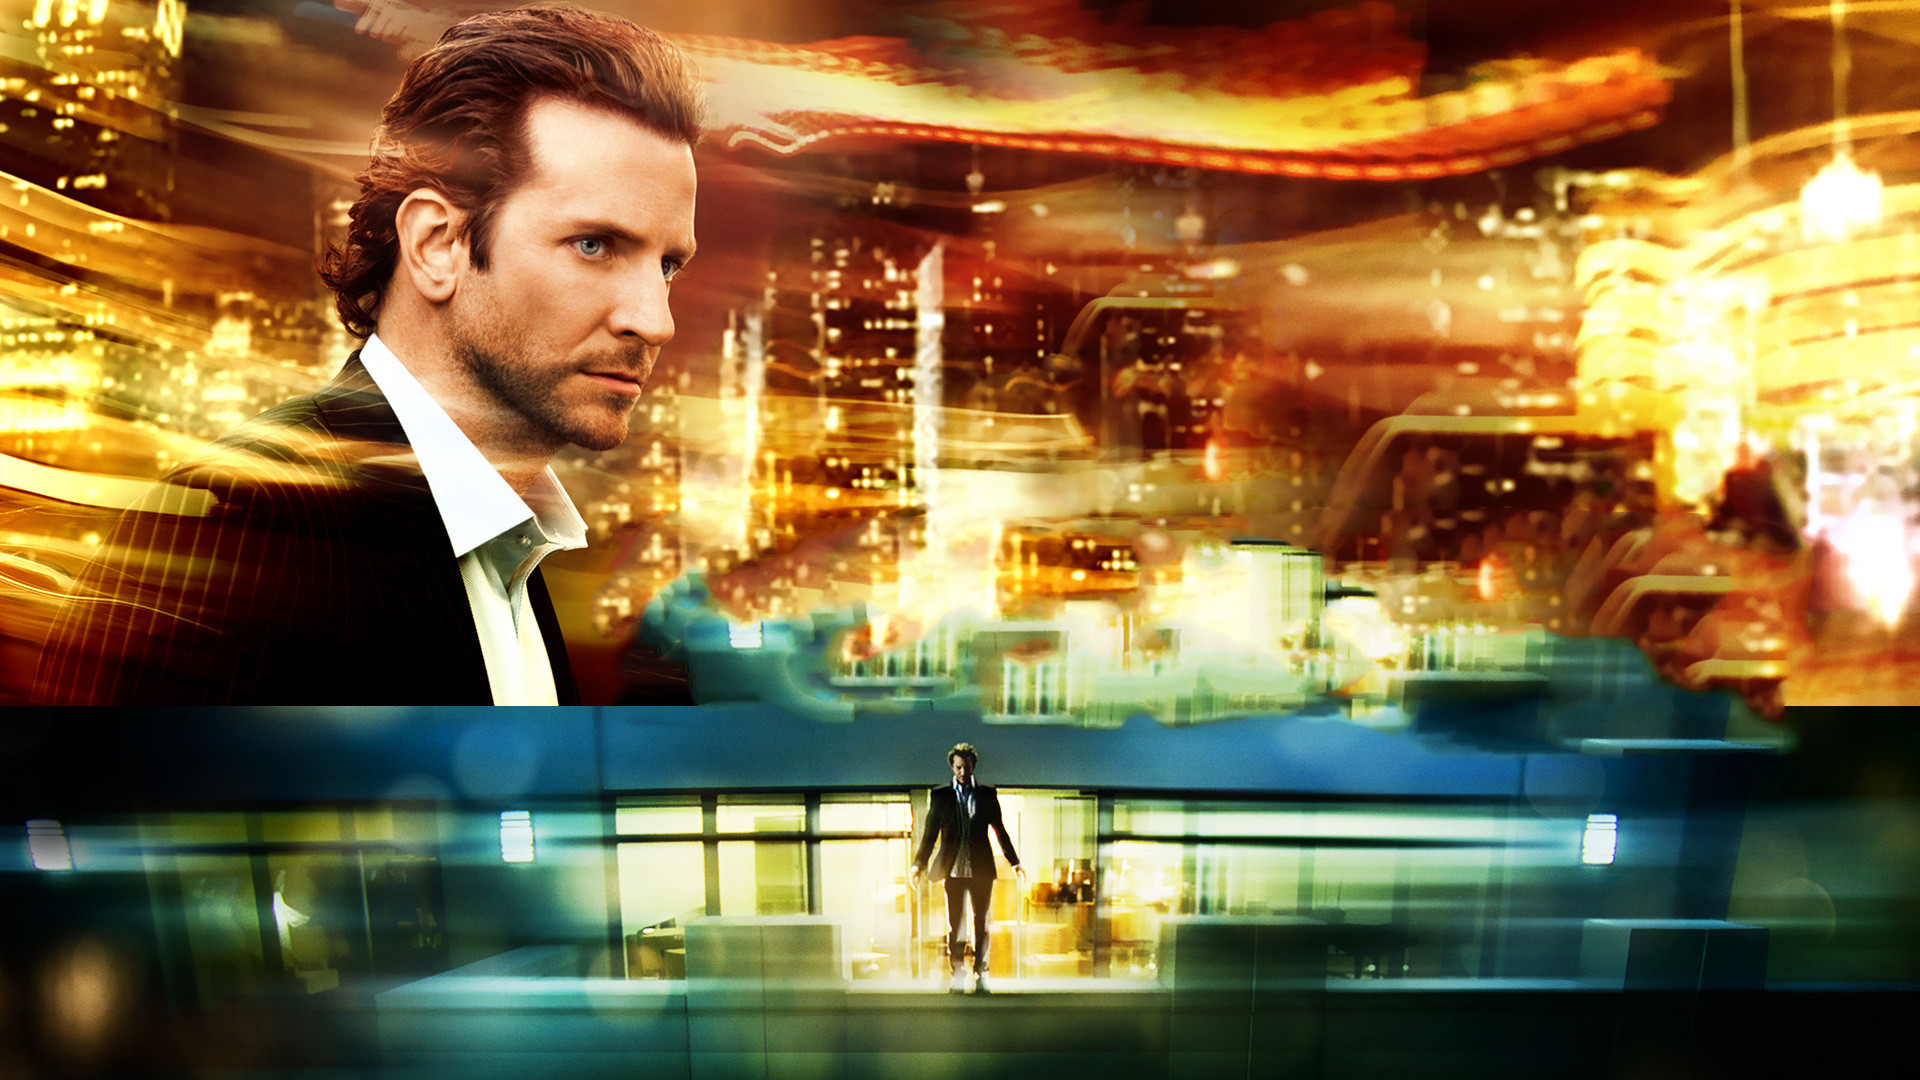 Movie Limitless HD Wallpaper | Background Image